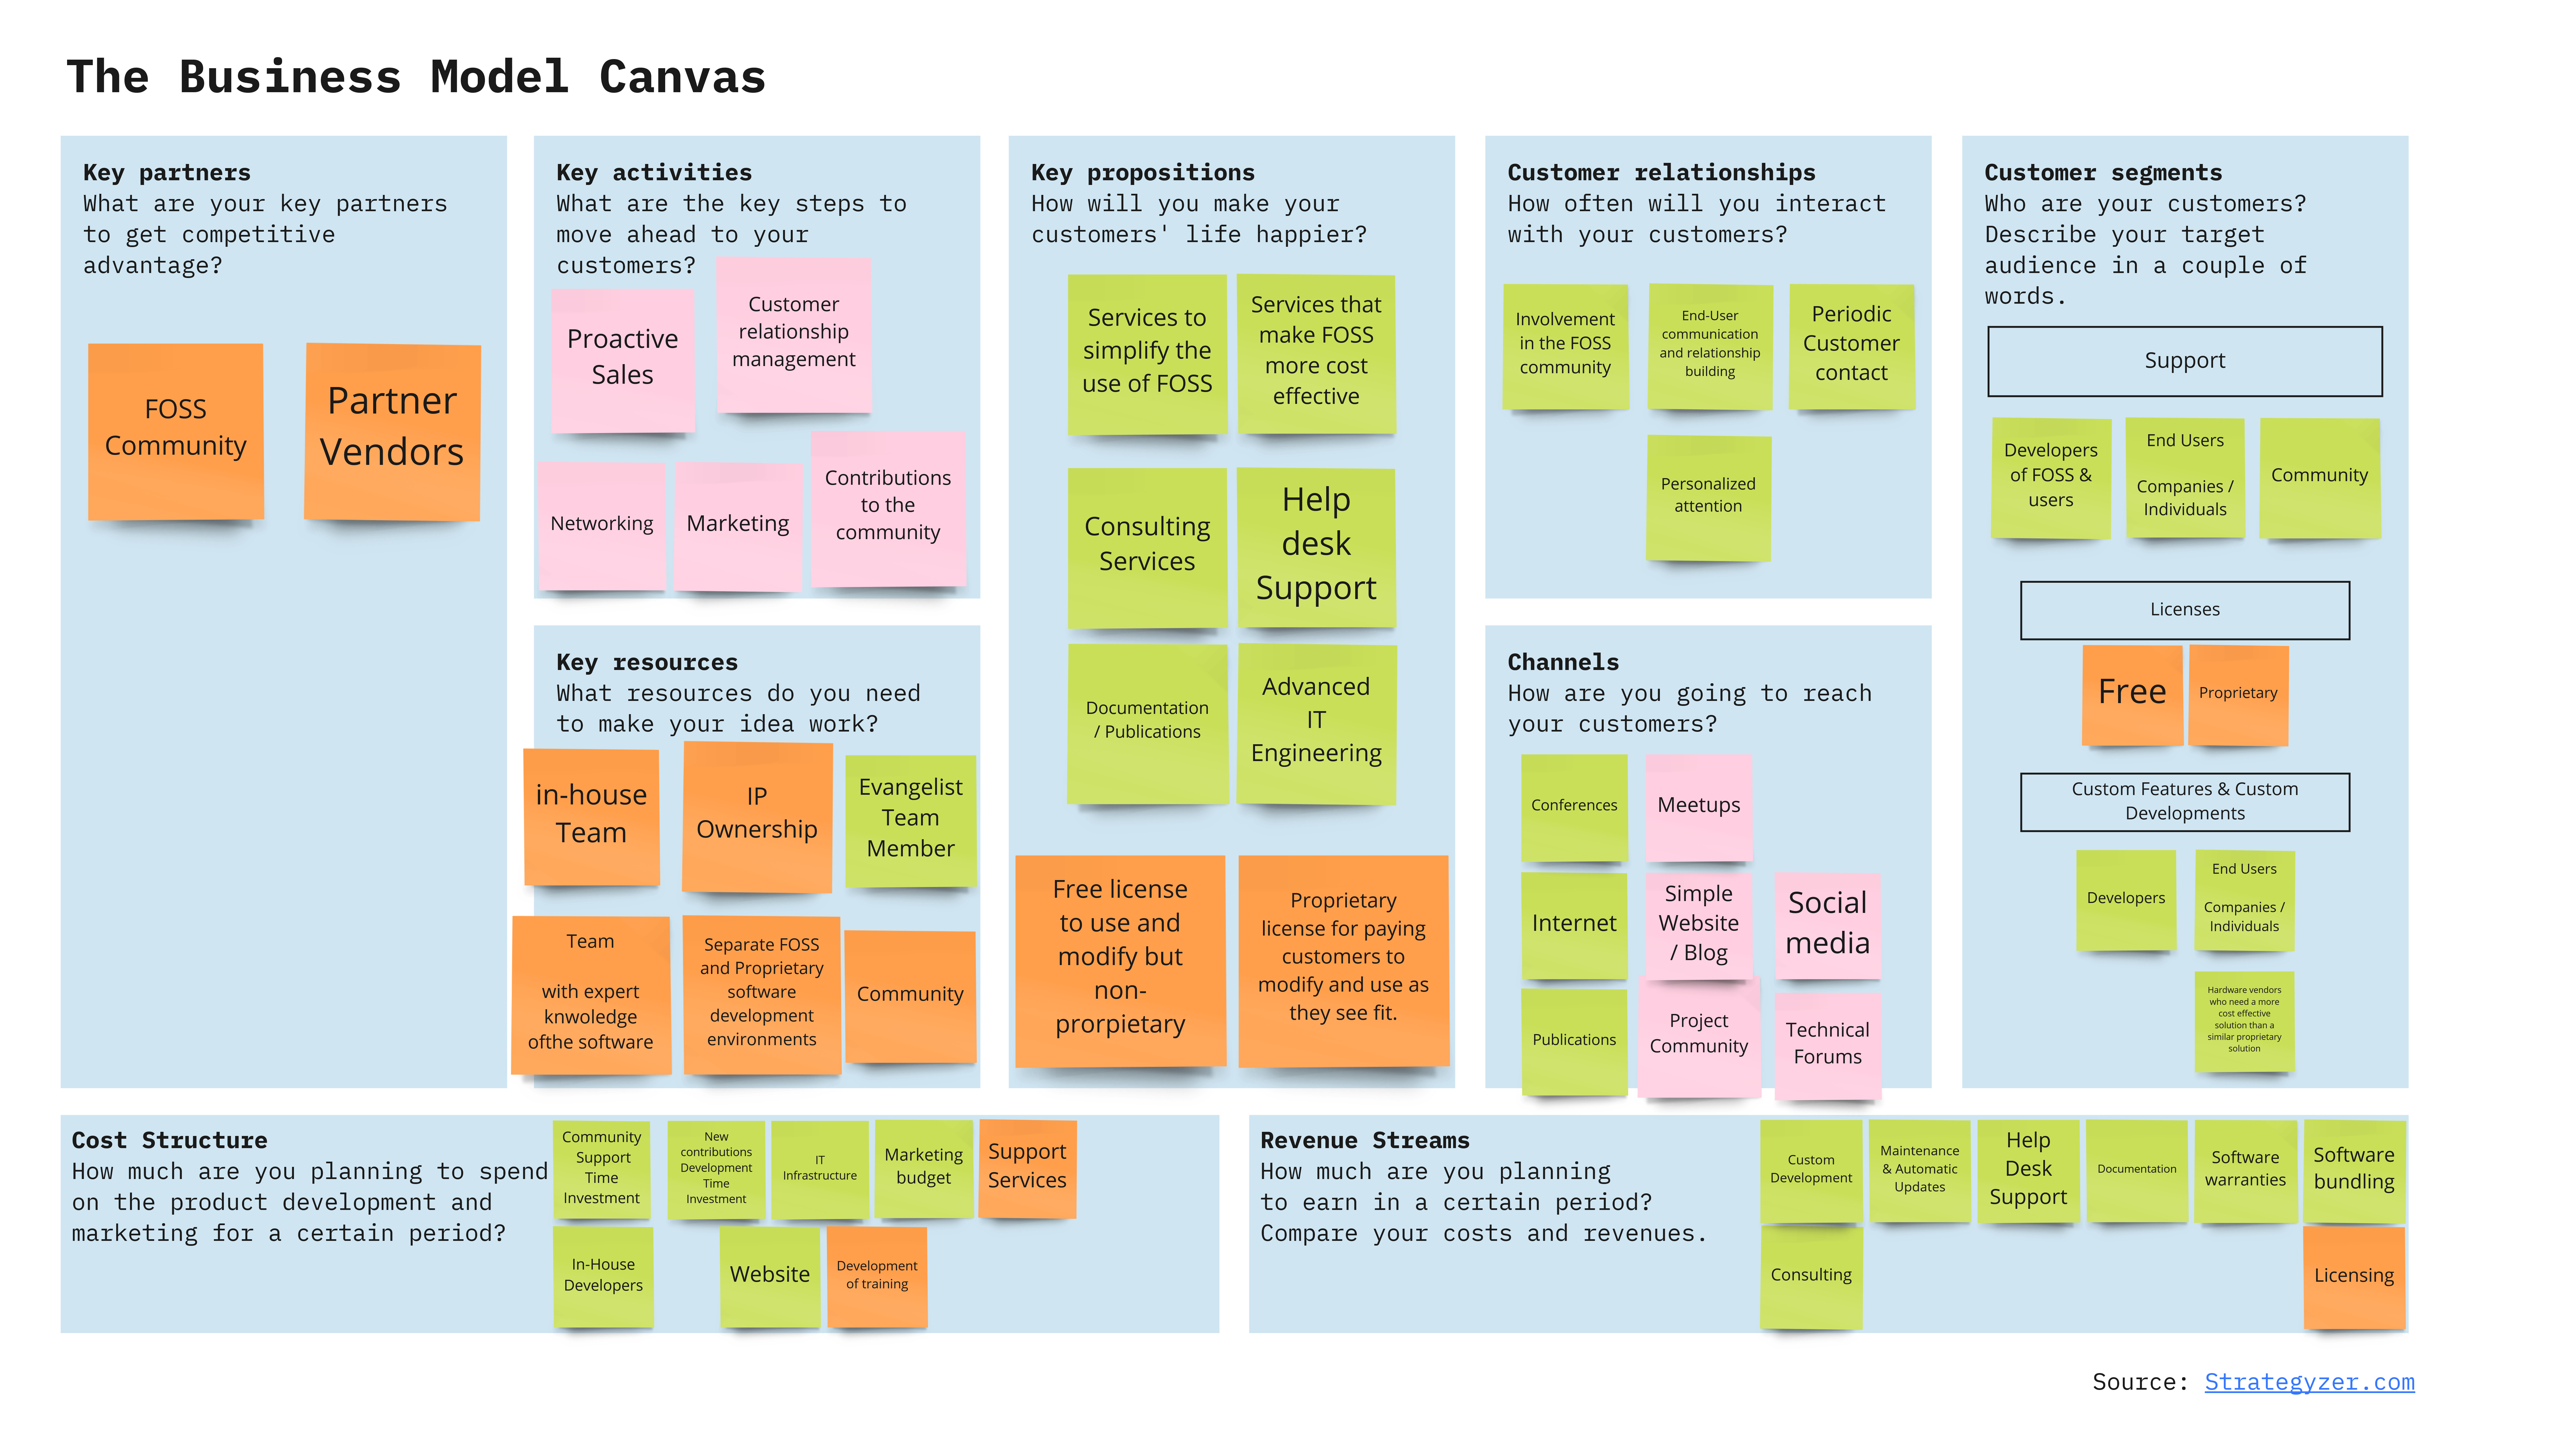 BUSINESS MODEL CANVAS: Dual Licensing